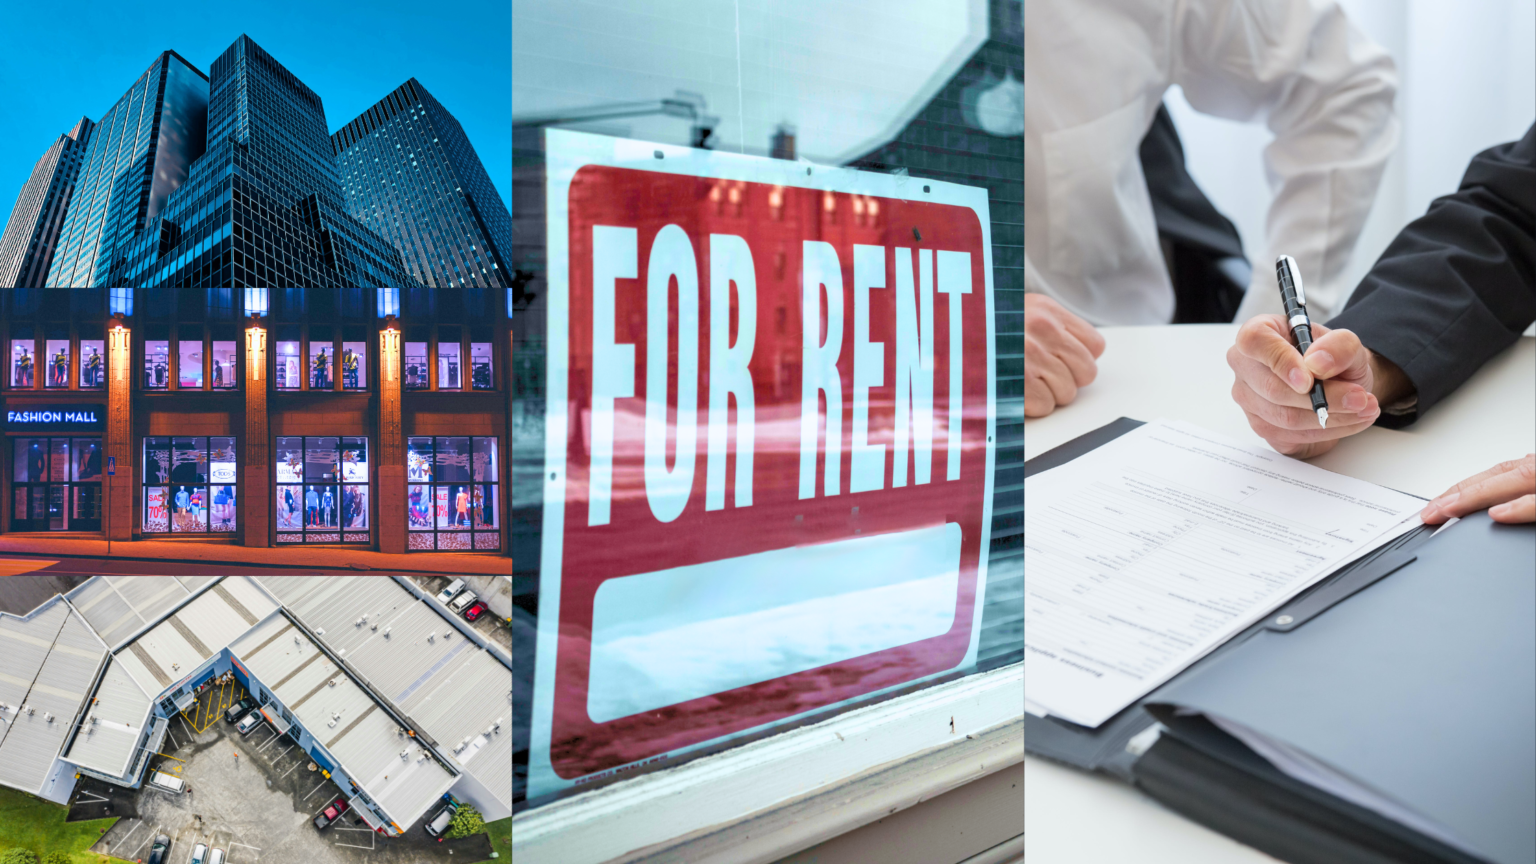 Choosing Commercial Investment Properties, Tenant Allowances, and Commercial Rent Structure. Image of a large group of office buildings (top, left), image of the outside windows of a fashion mall (middle, left), overhead view of an industrial building (bottom left), image of a red and white "for rent" sign (middle), and image of a person signing a contract while someone else watches (right).